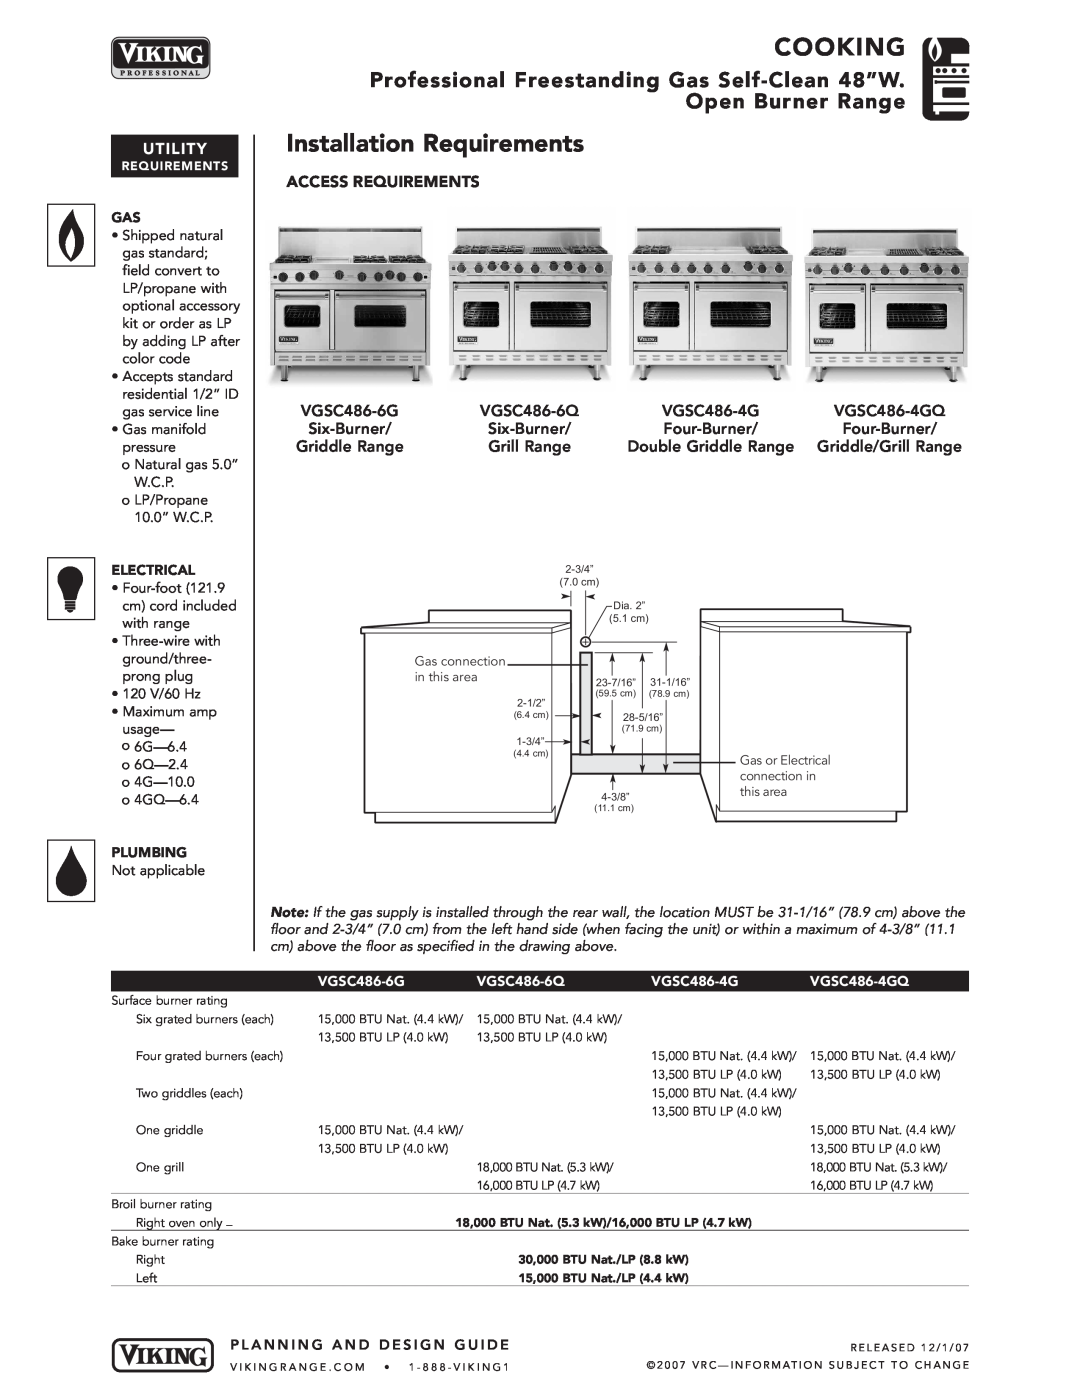 Viking VGSC486 manual Installation Requirements, Access Requirements, Cooking, Utility 